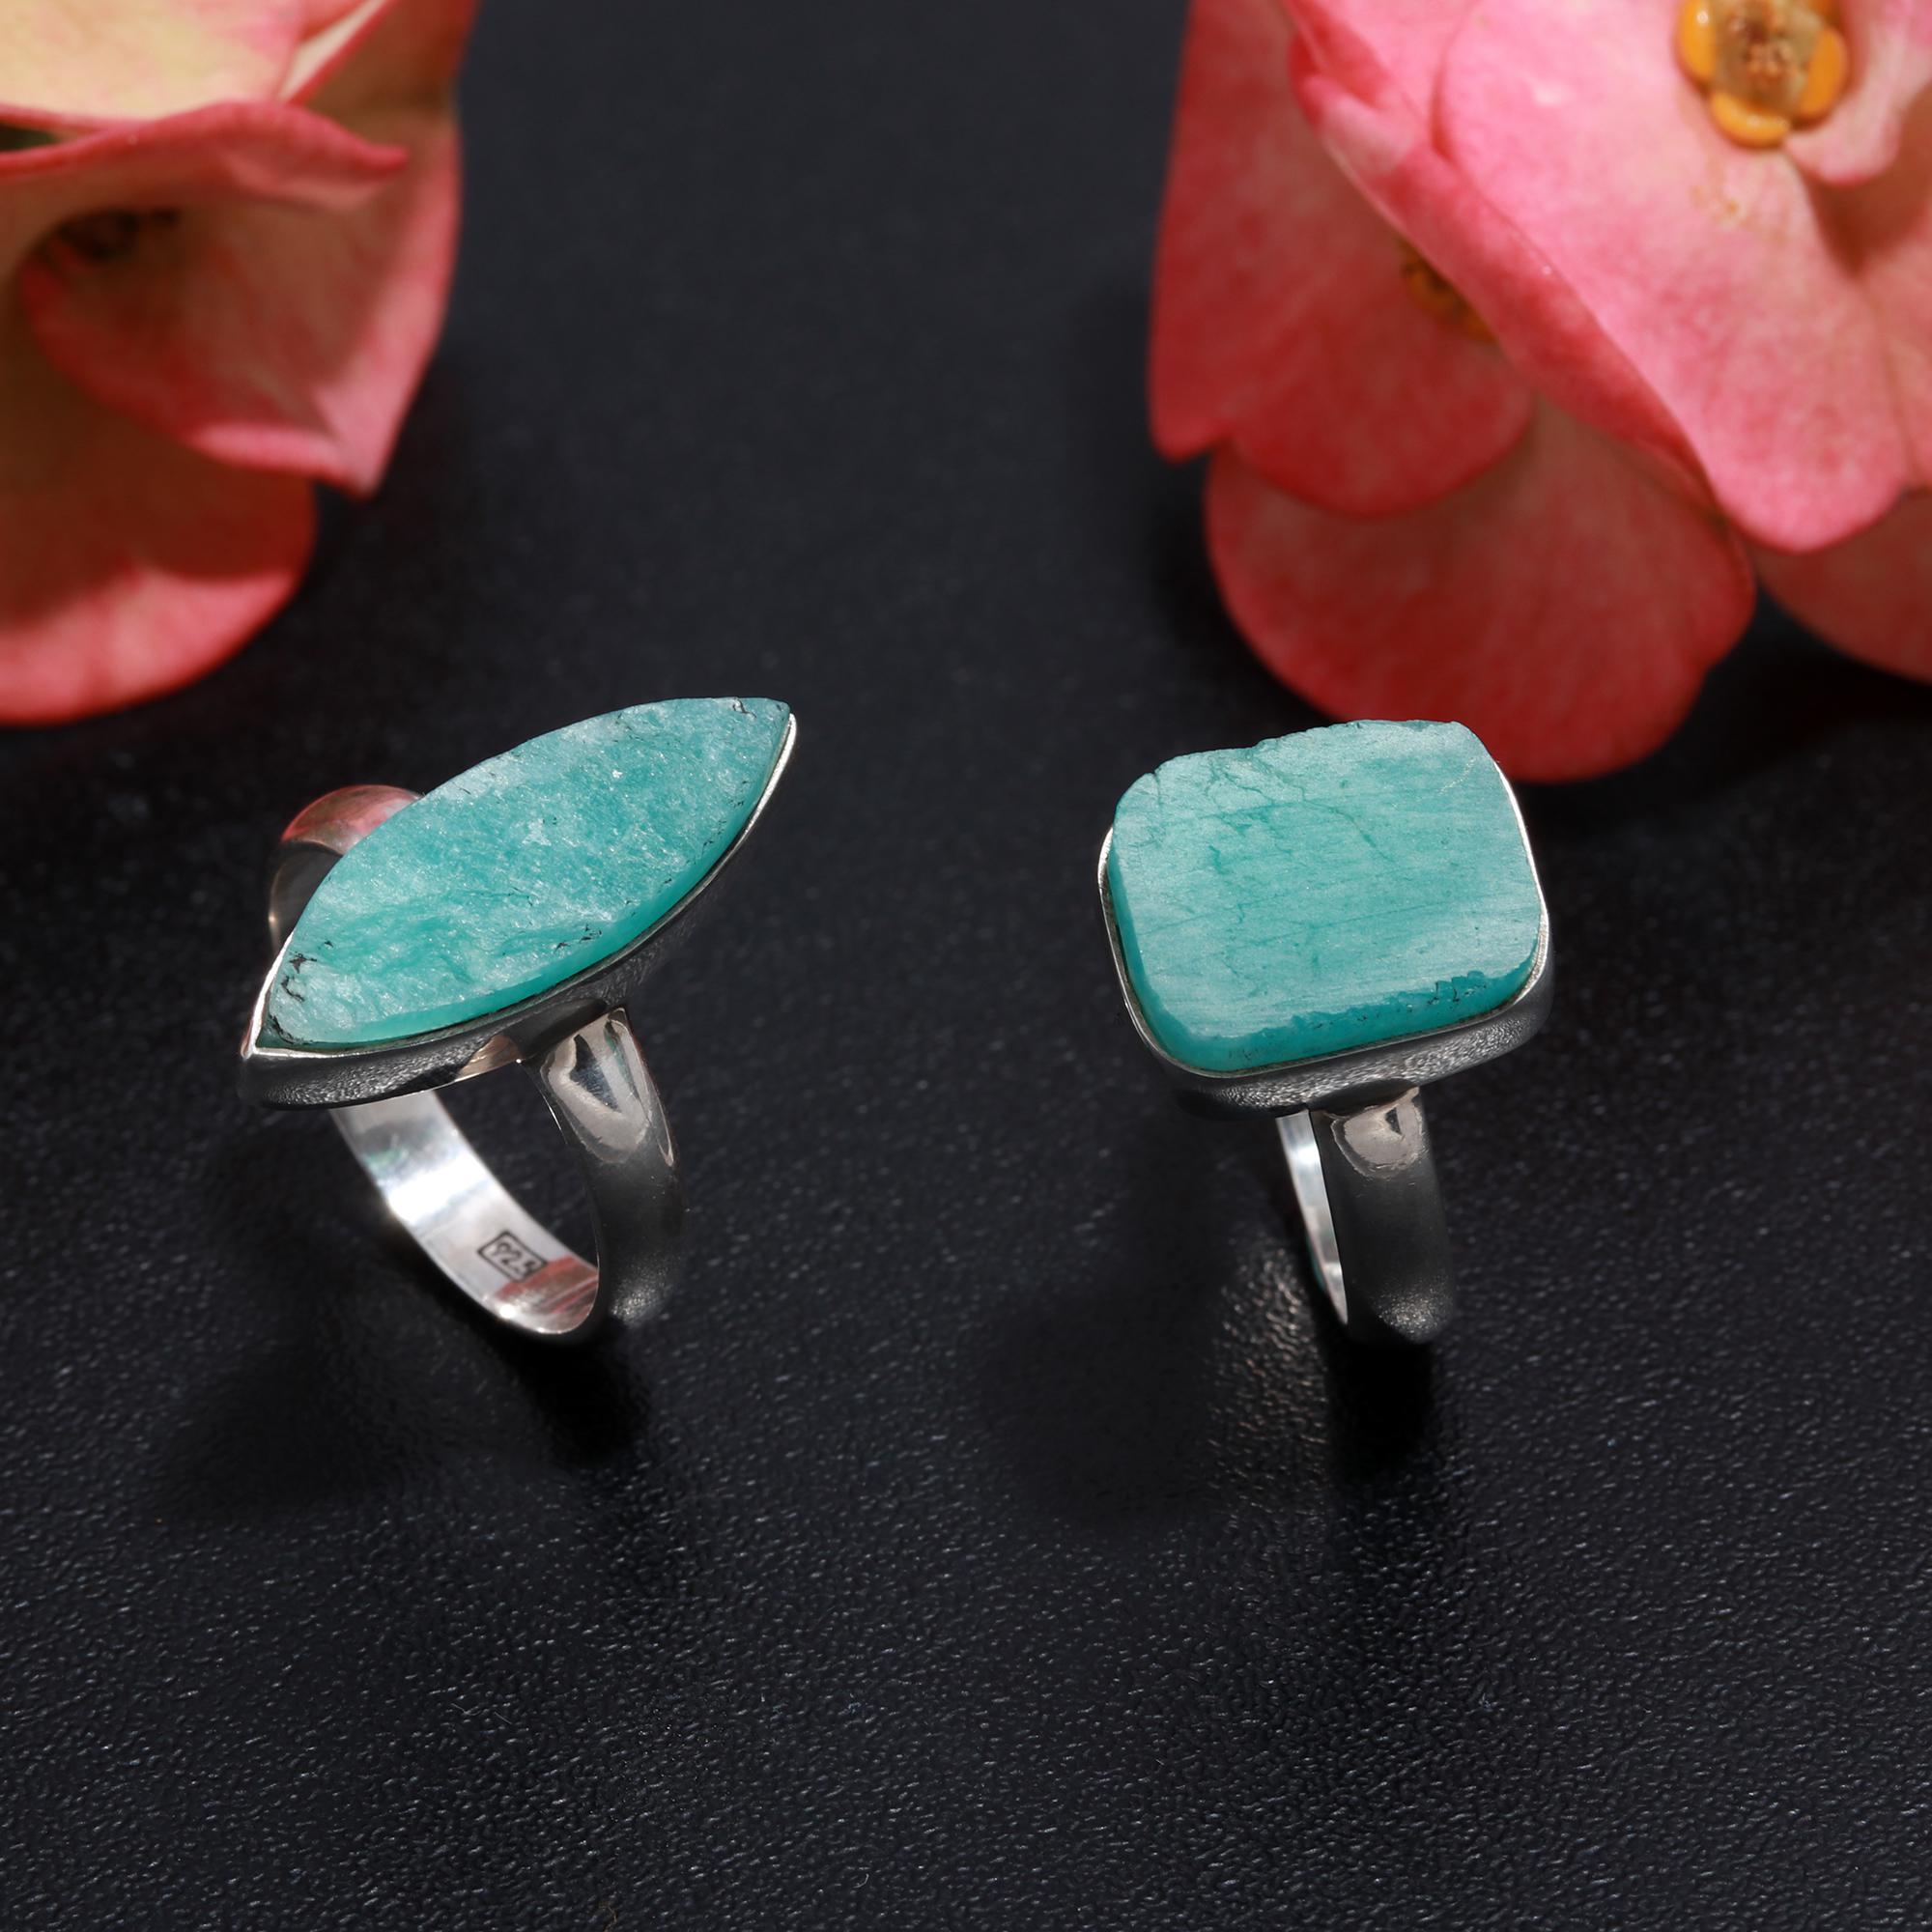 925 Sterling Silver Amazonite Fashion Jewelry Adjustable Ring 2Pcs 52Cts 22x7 13x10mm#1041